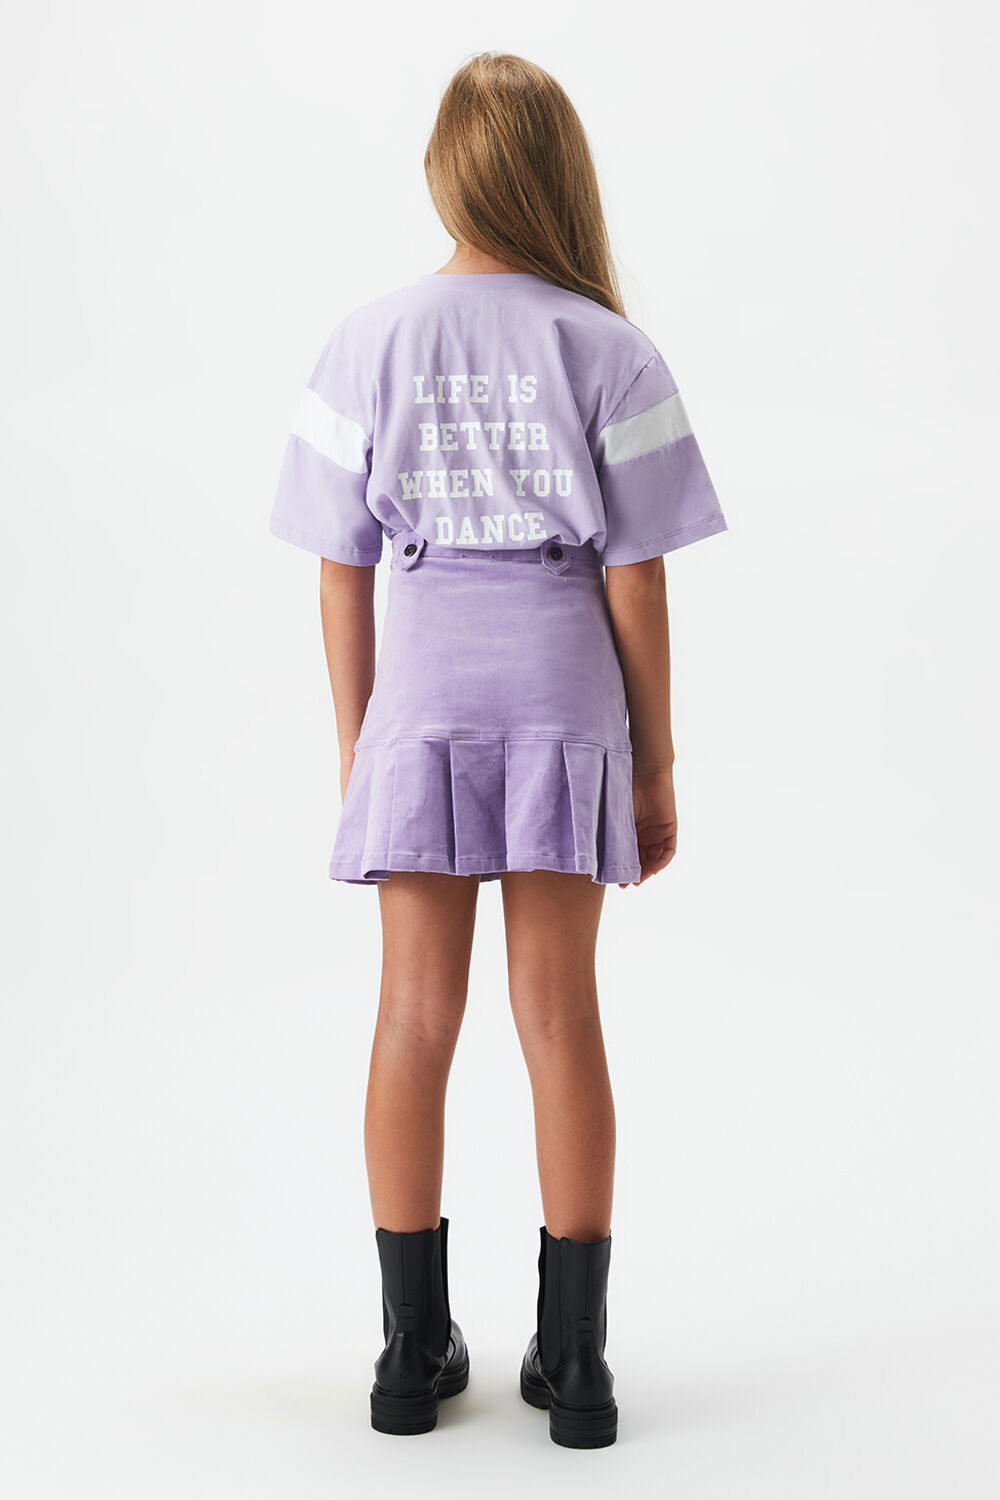 GIRLS KARLA CORD PLEATED SKIRT in colour LILAC CHIFFON